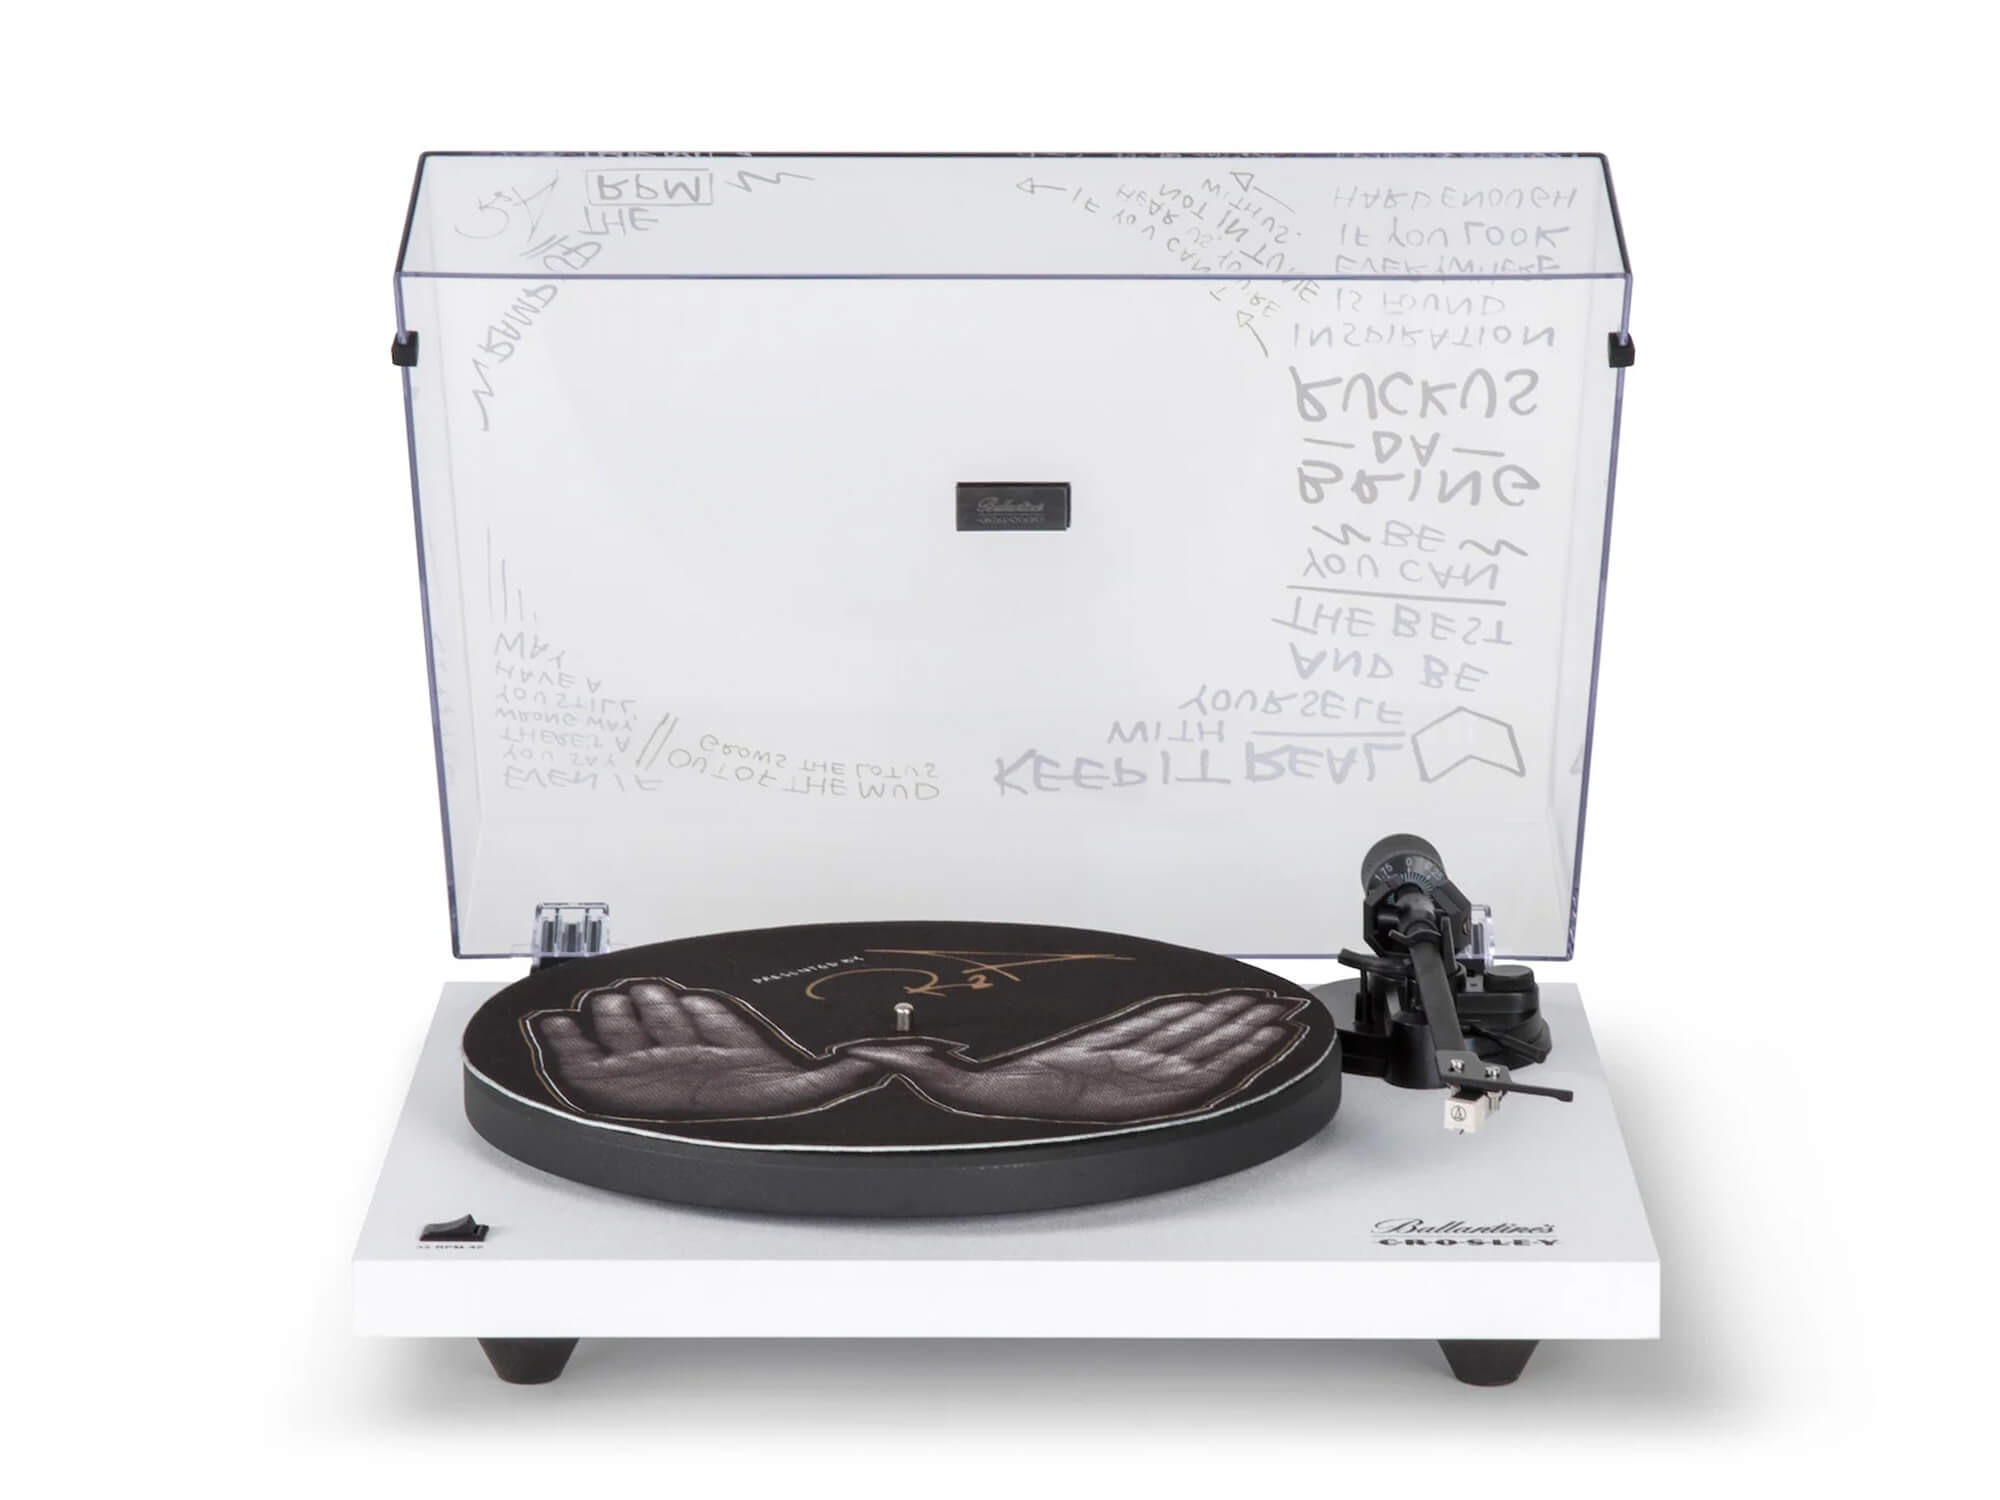 RZA Crosley turntable in White